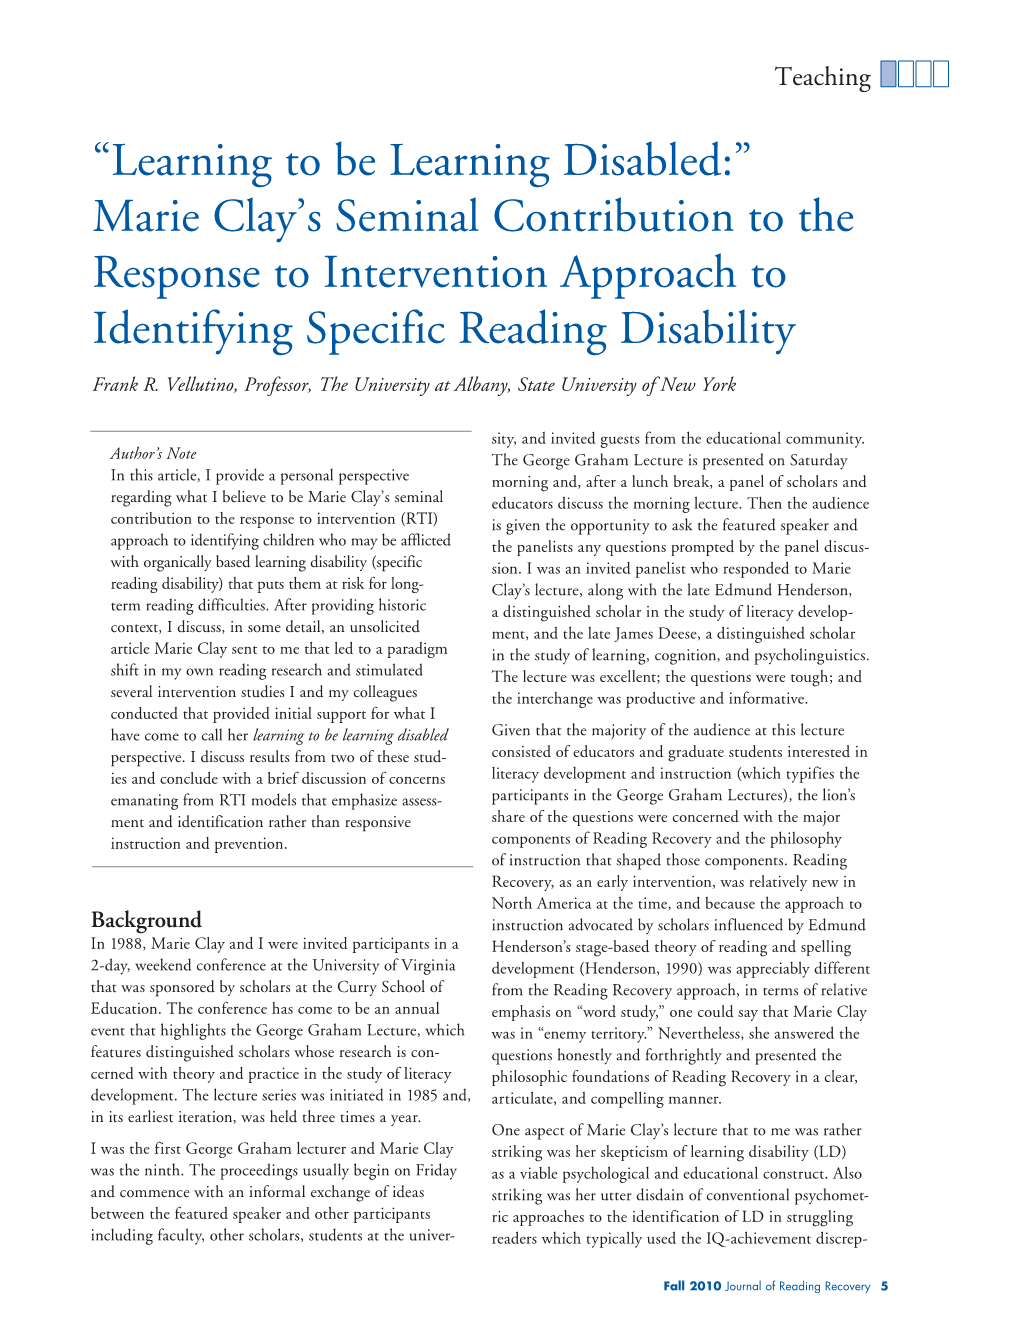 “Learning to Be Learning Disabled:” Marie Clay's Seminal Contribution